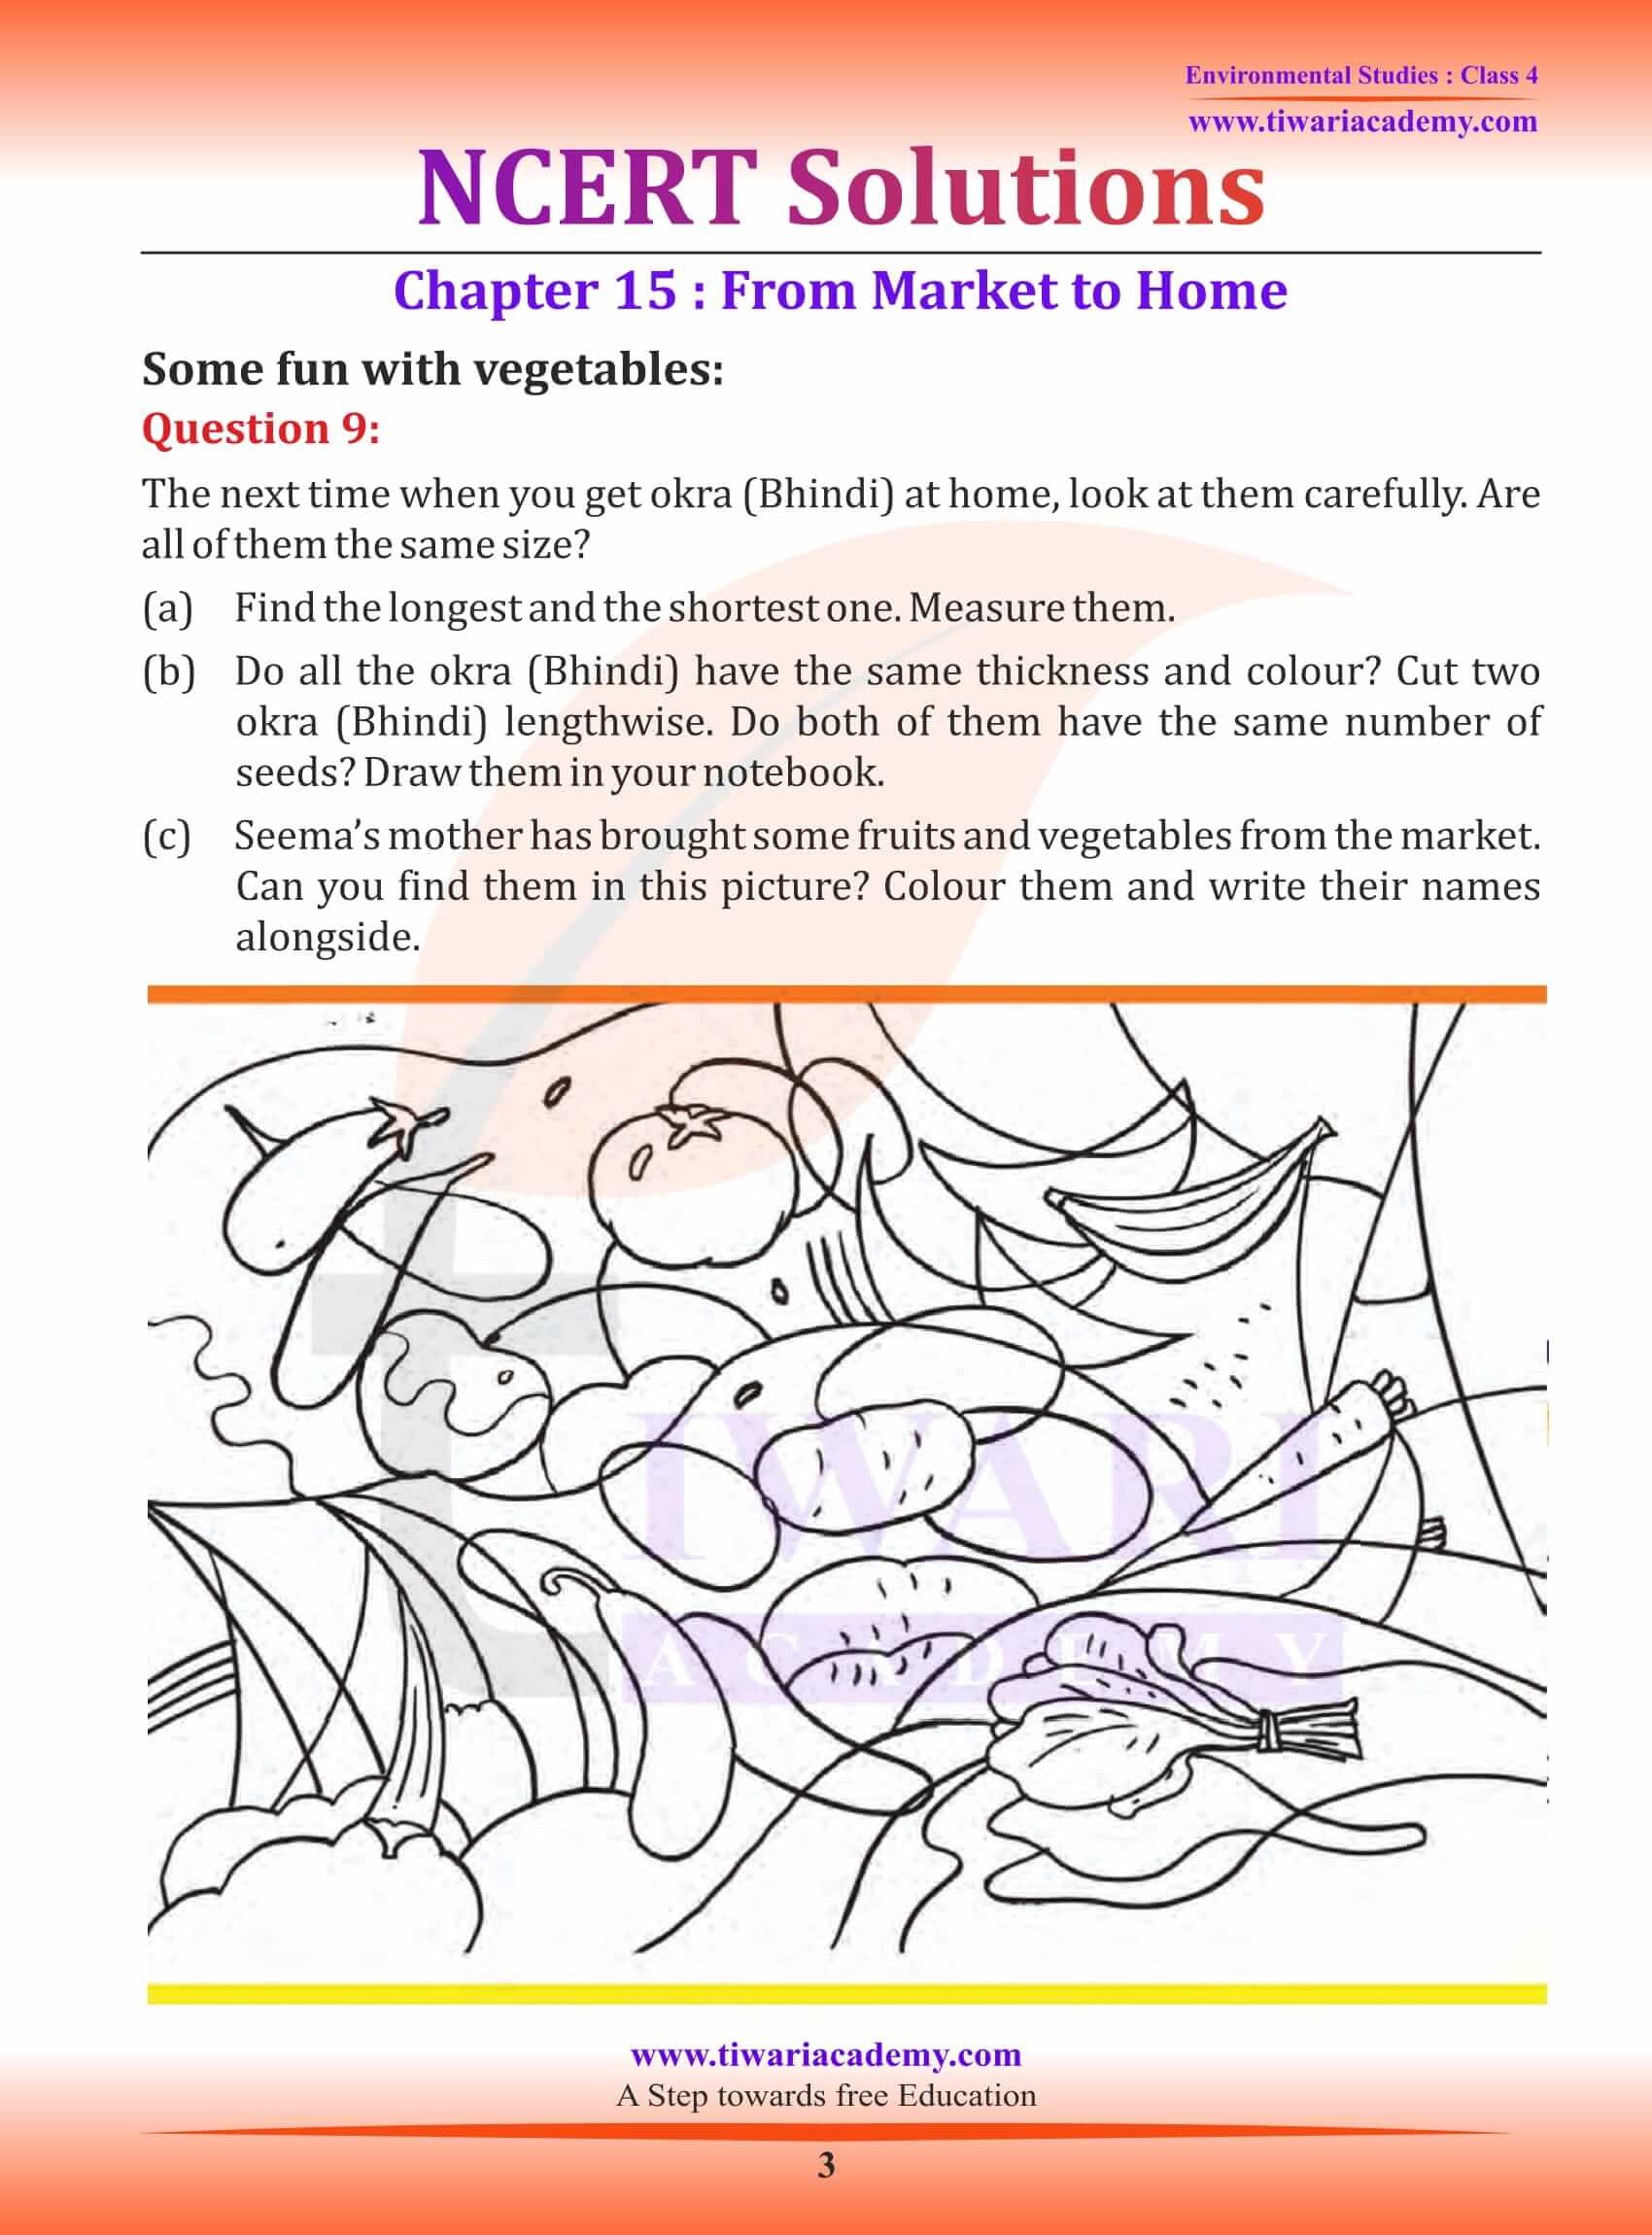 NCERT Solutions for Class 4 EVS Chapter 15